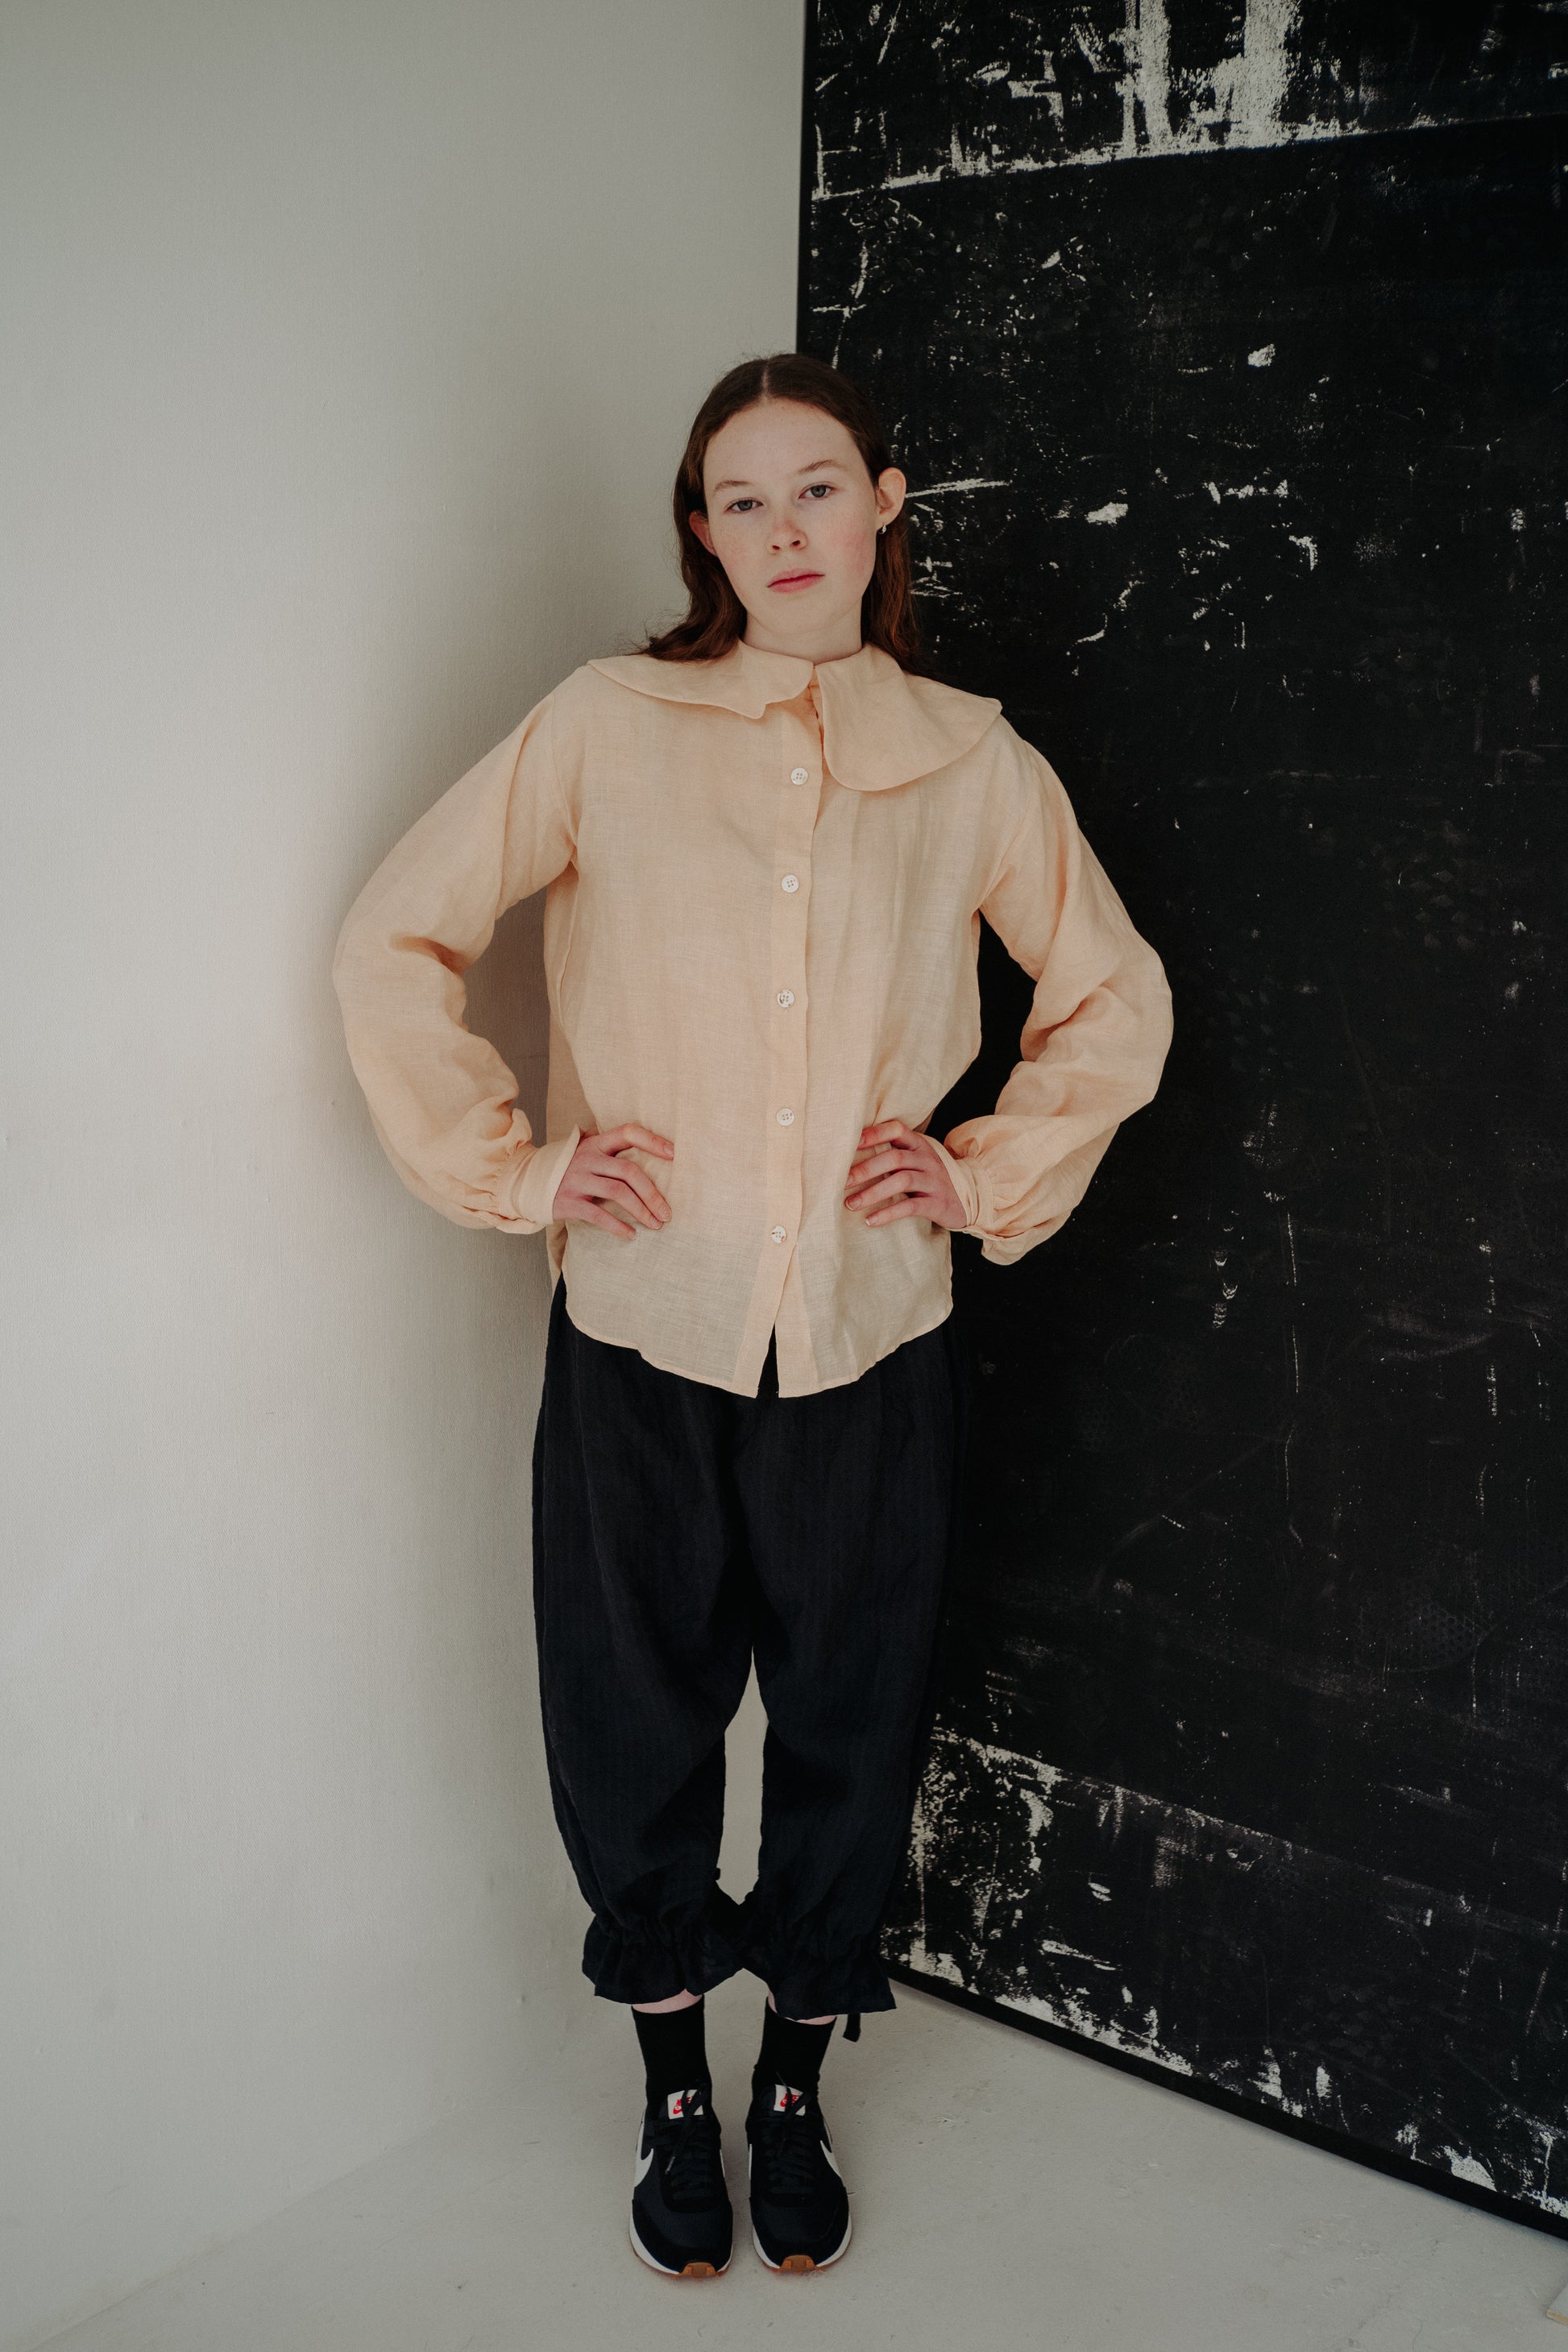 TABITHA BLOUSE | A fun update on our Willow blouse but with big collar drama. The Tabitha blouse features an oversized, asymmetric collar and cuffs with subtle embroidery detail on the back. Created with a very special naturally dyed linen, each blouse ca